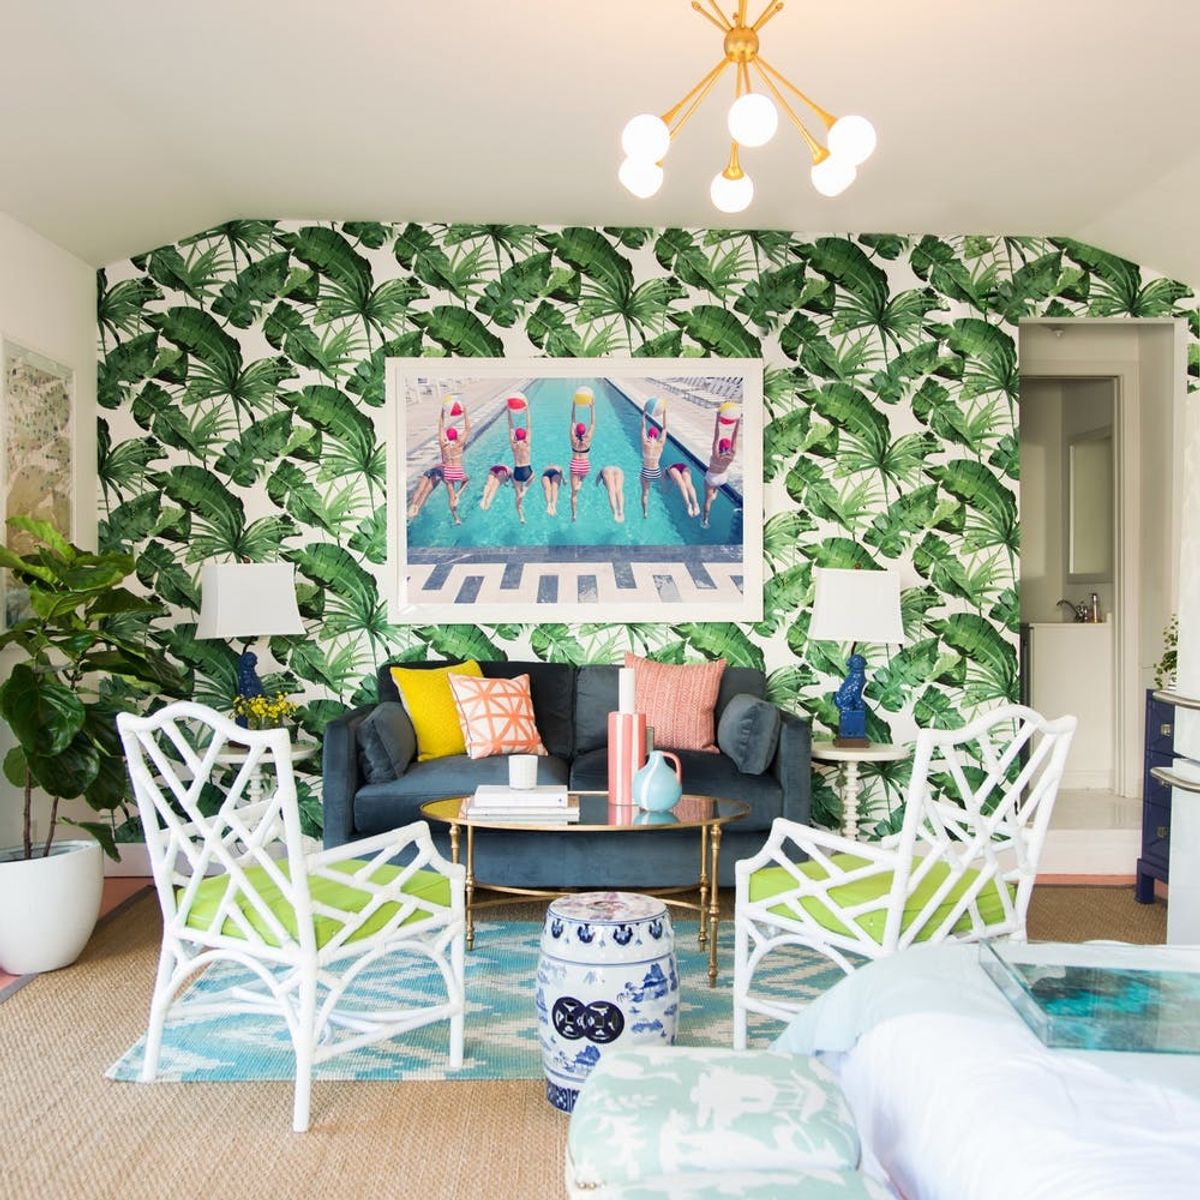 Your Foolproof Strategy for Mastering the Maximalism Decor Trend